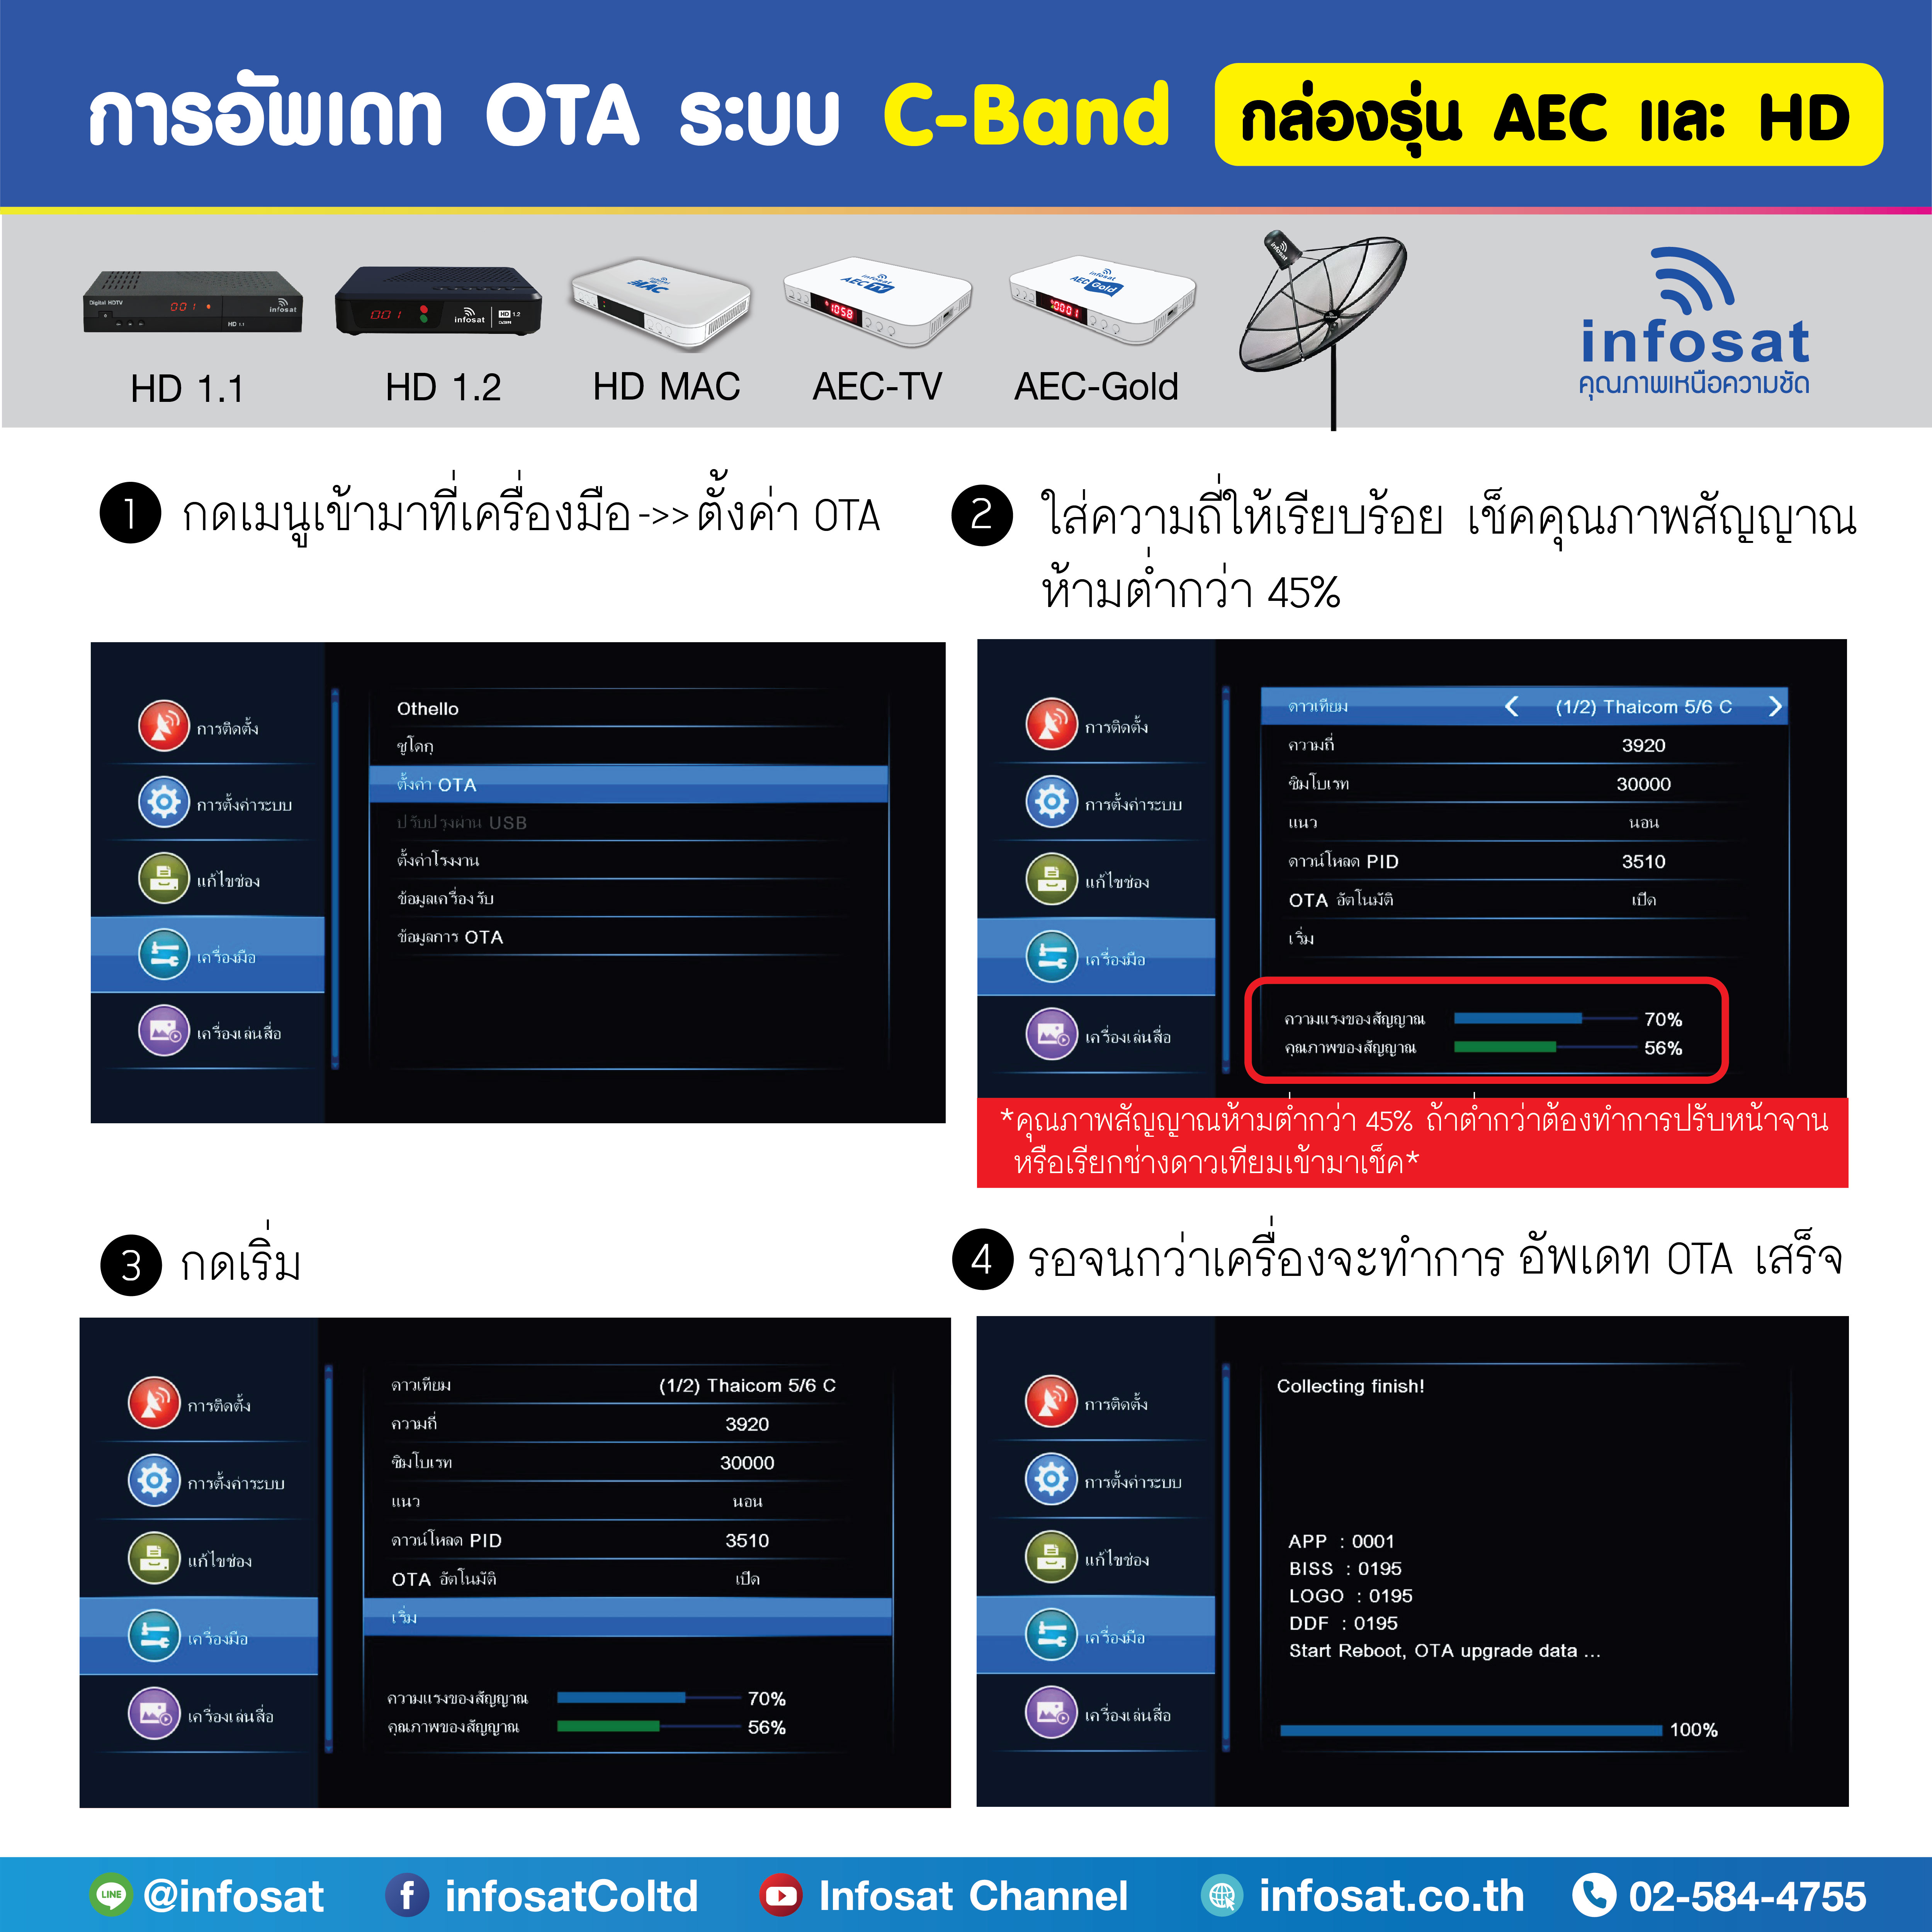 Update OTA C-Band For AEC and HD